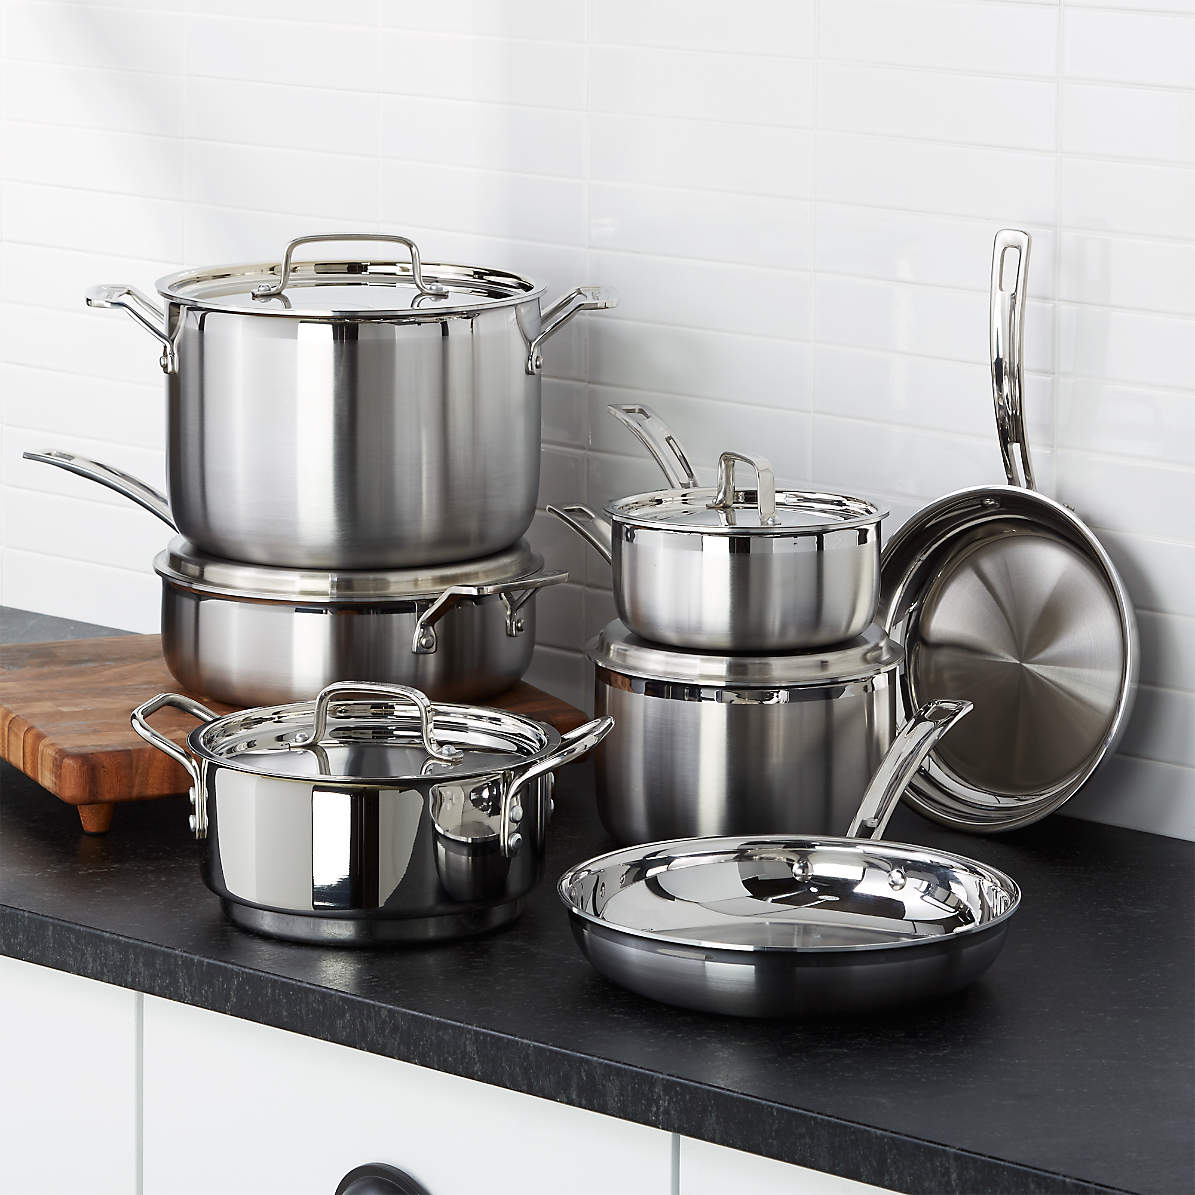 Cookware Set Stainless Steel 12-Piece Gourmet Tri-Ply Base Kitchen Oven Safe 